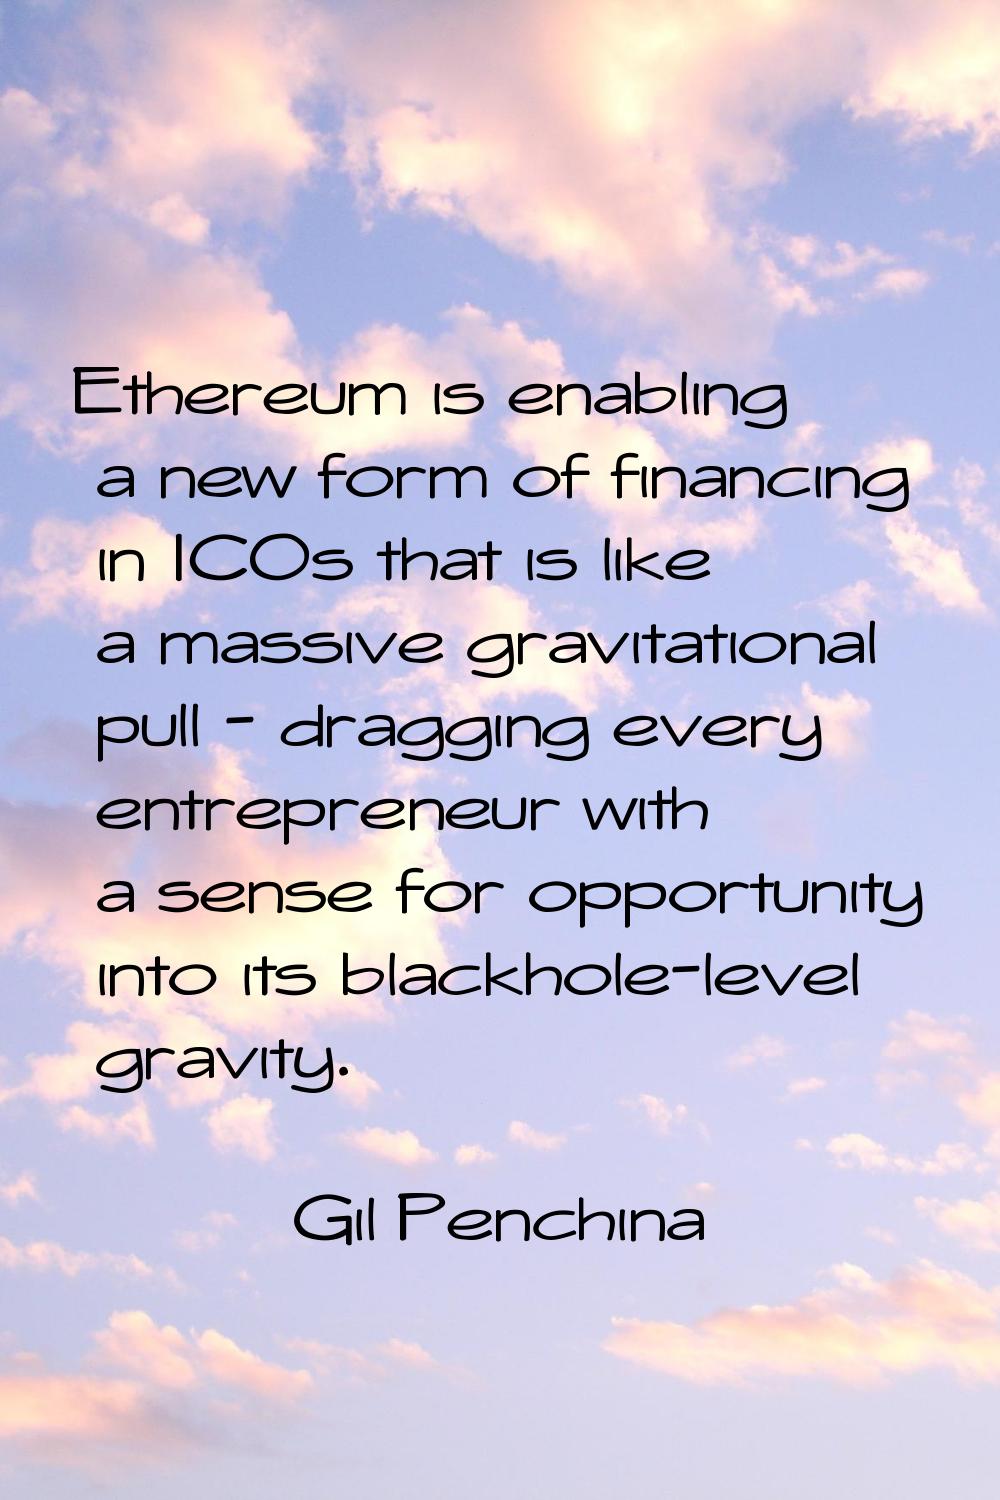 Ethereum is enabling a new form of financing in ICOs that is like a massive gravitational pull - dr